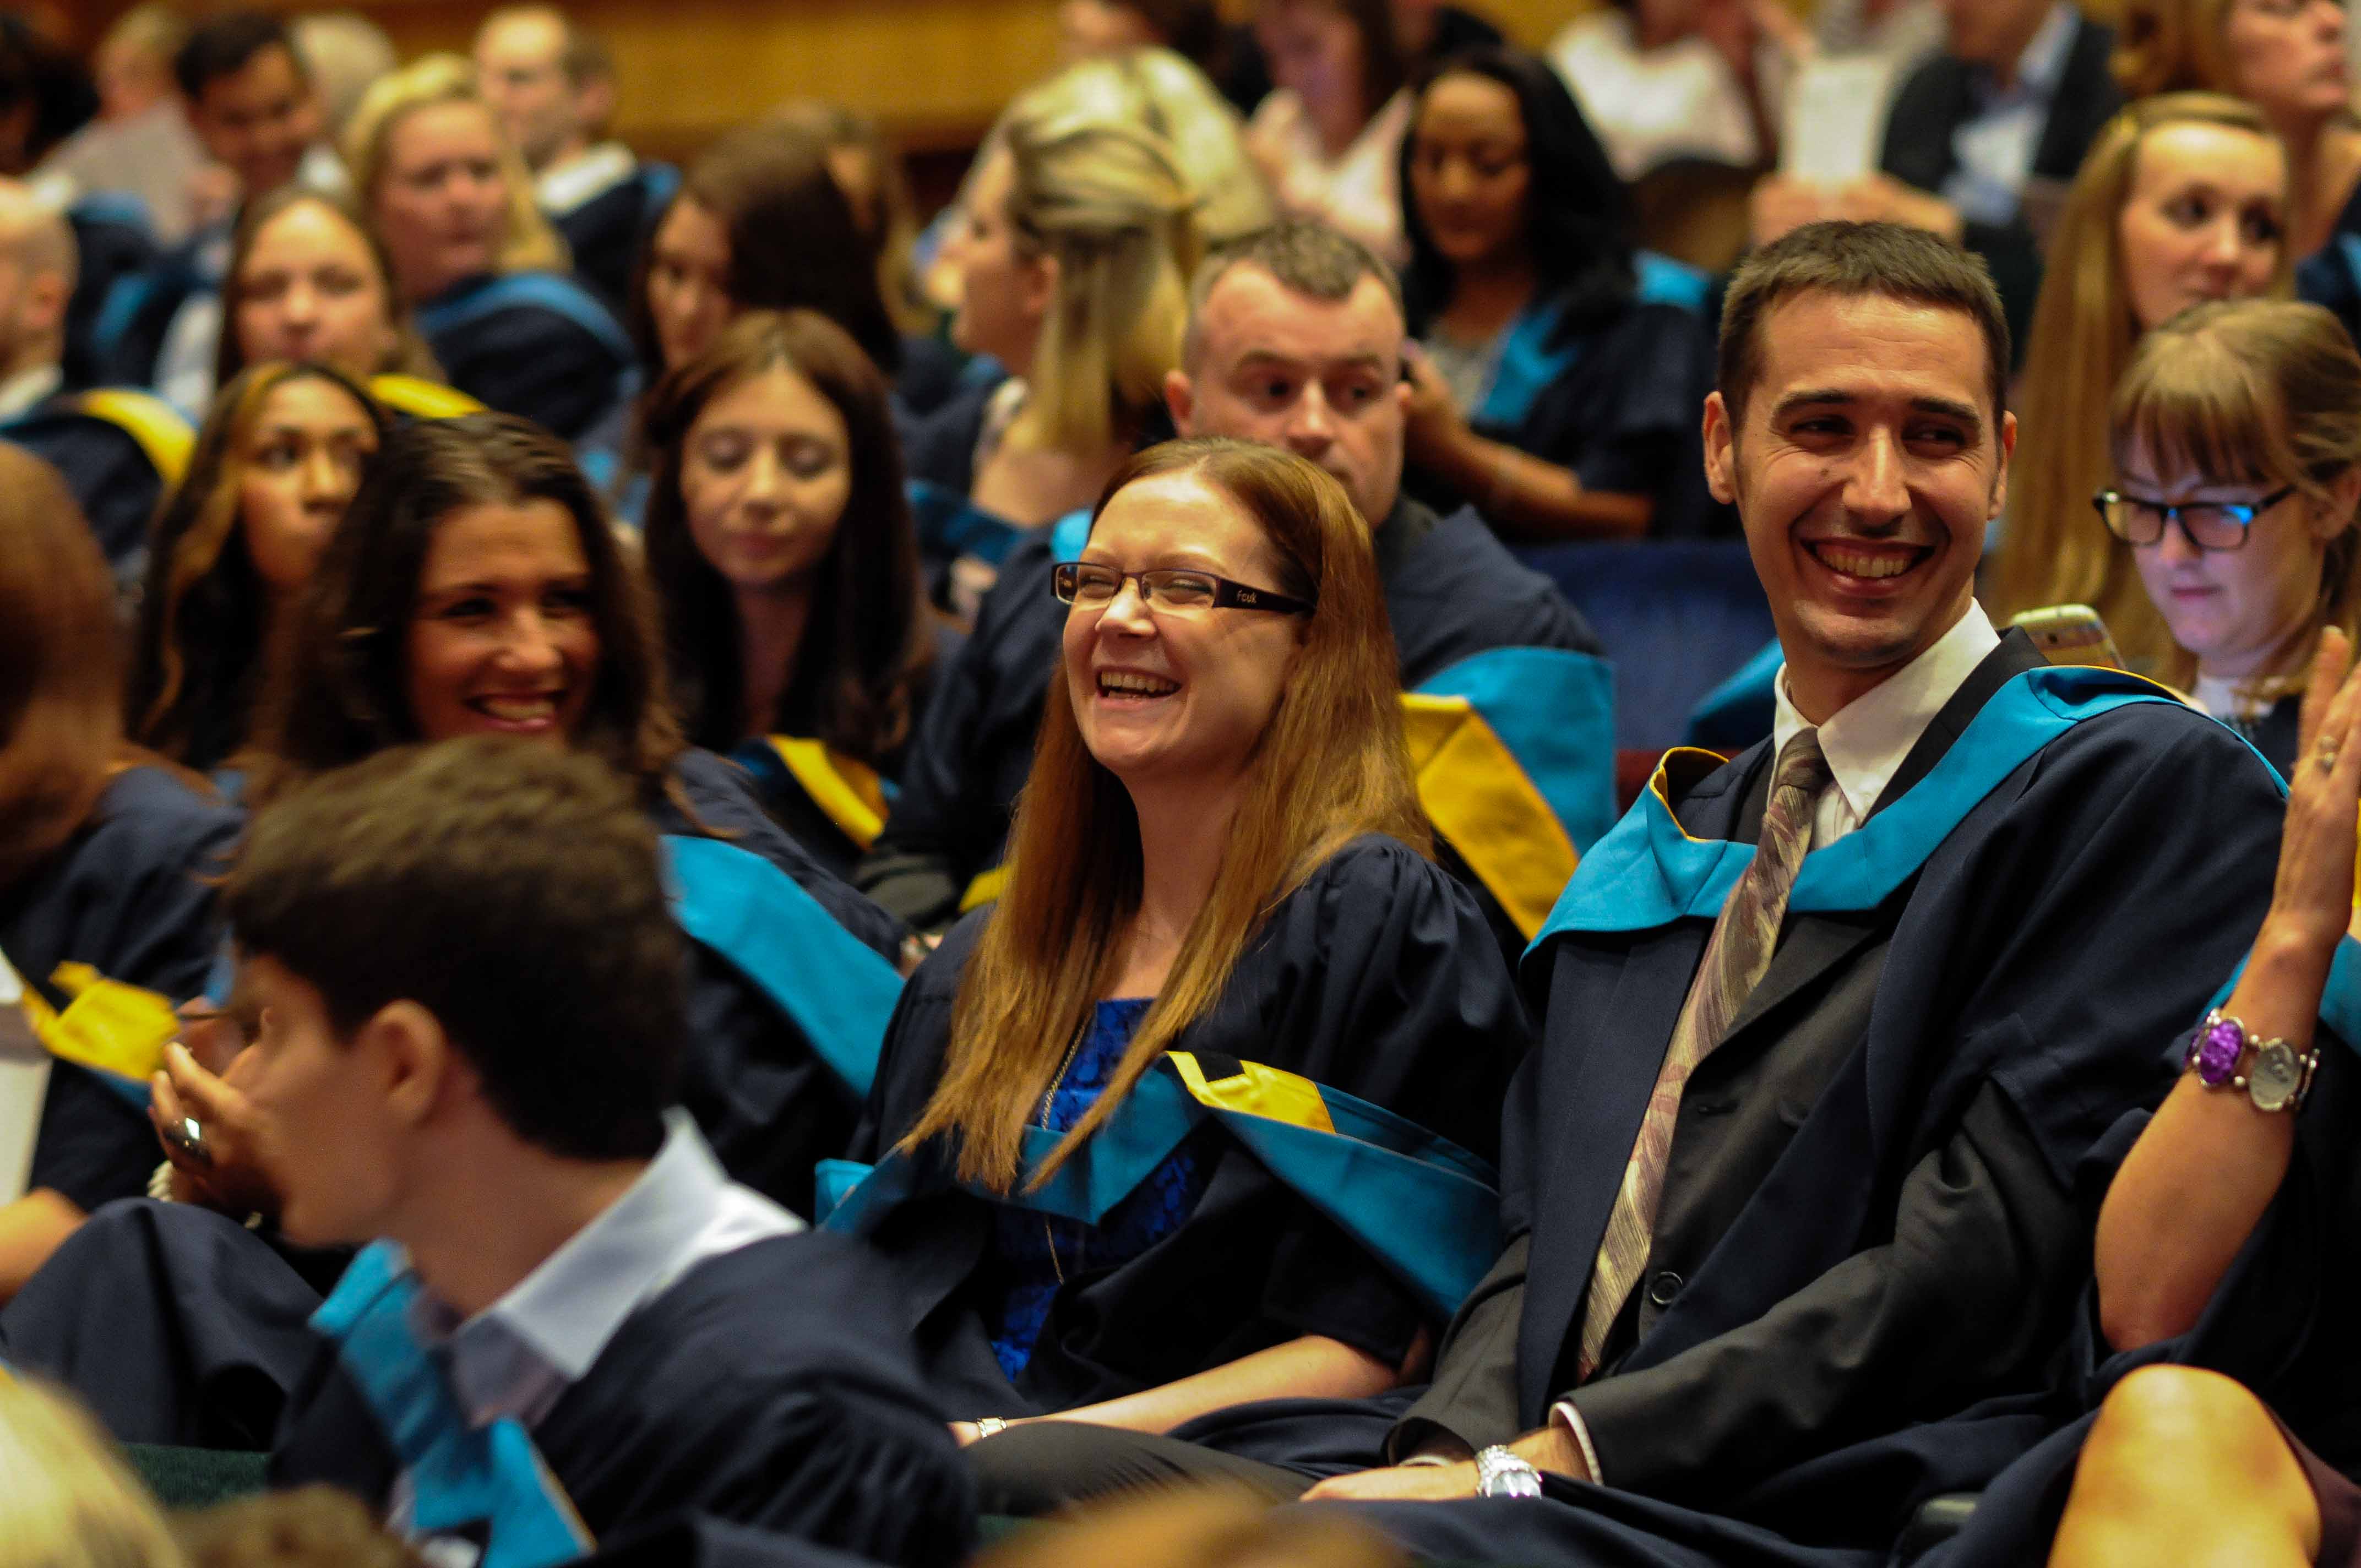 Image of a group of graduates laughing during a graduation ceremony